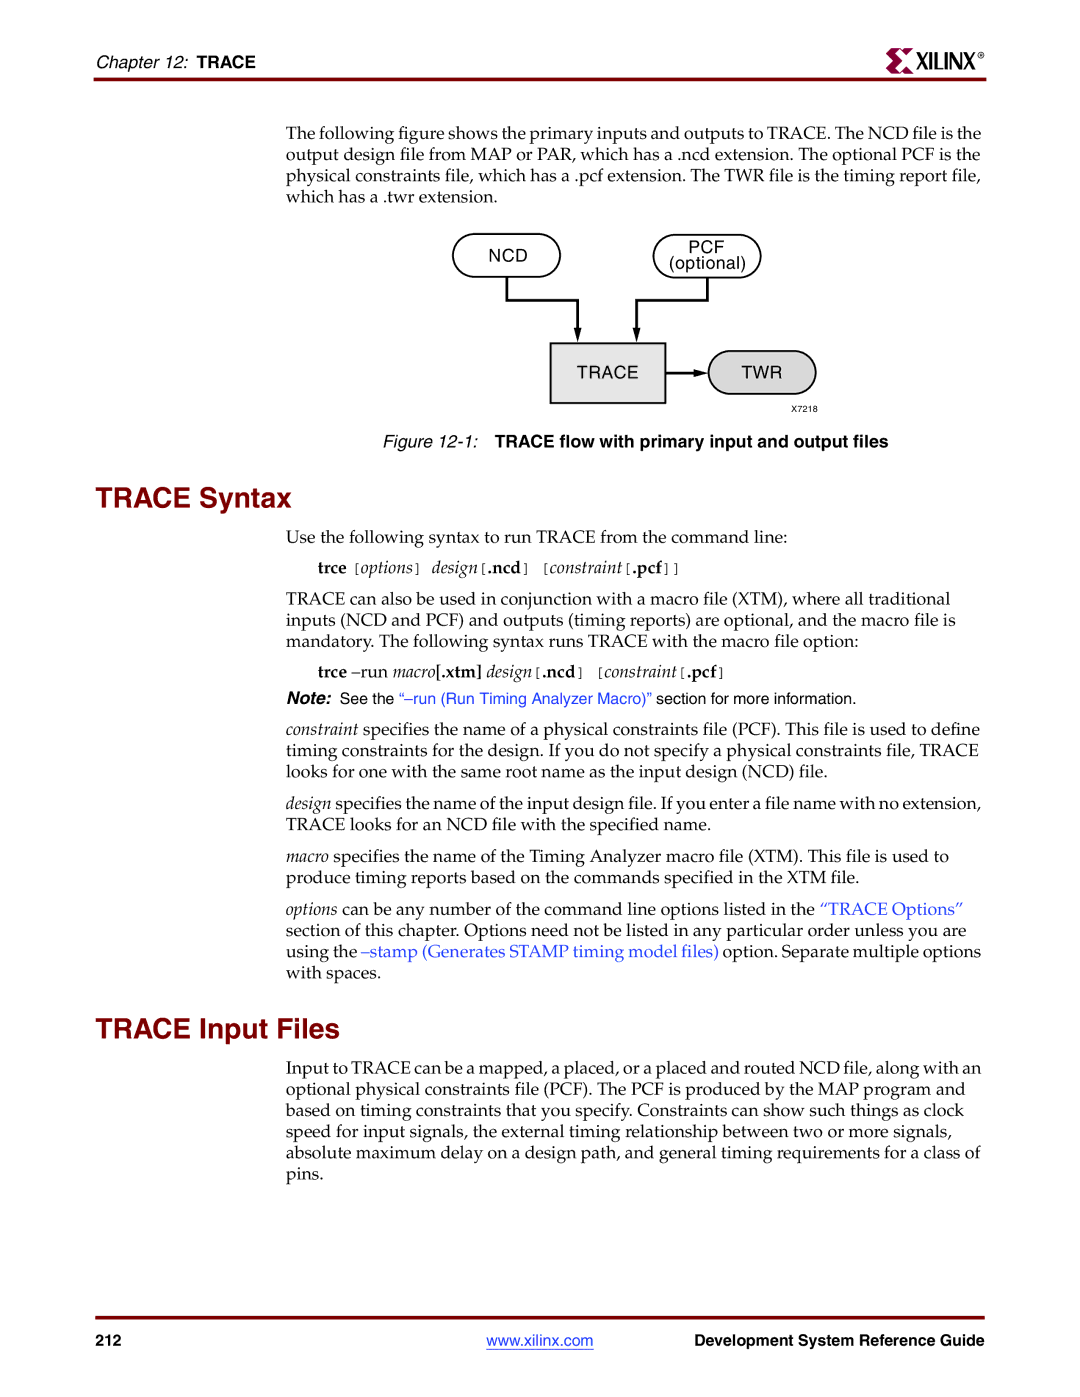 Xilinx 8.2i manual Trace Syntax, Trace Input Files, Trce options design.ncd constraint.pcf 